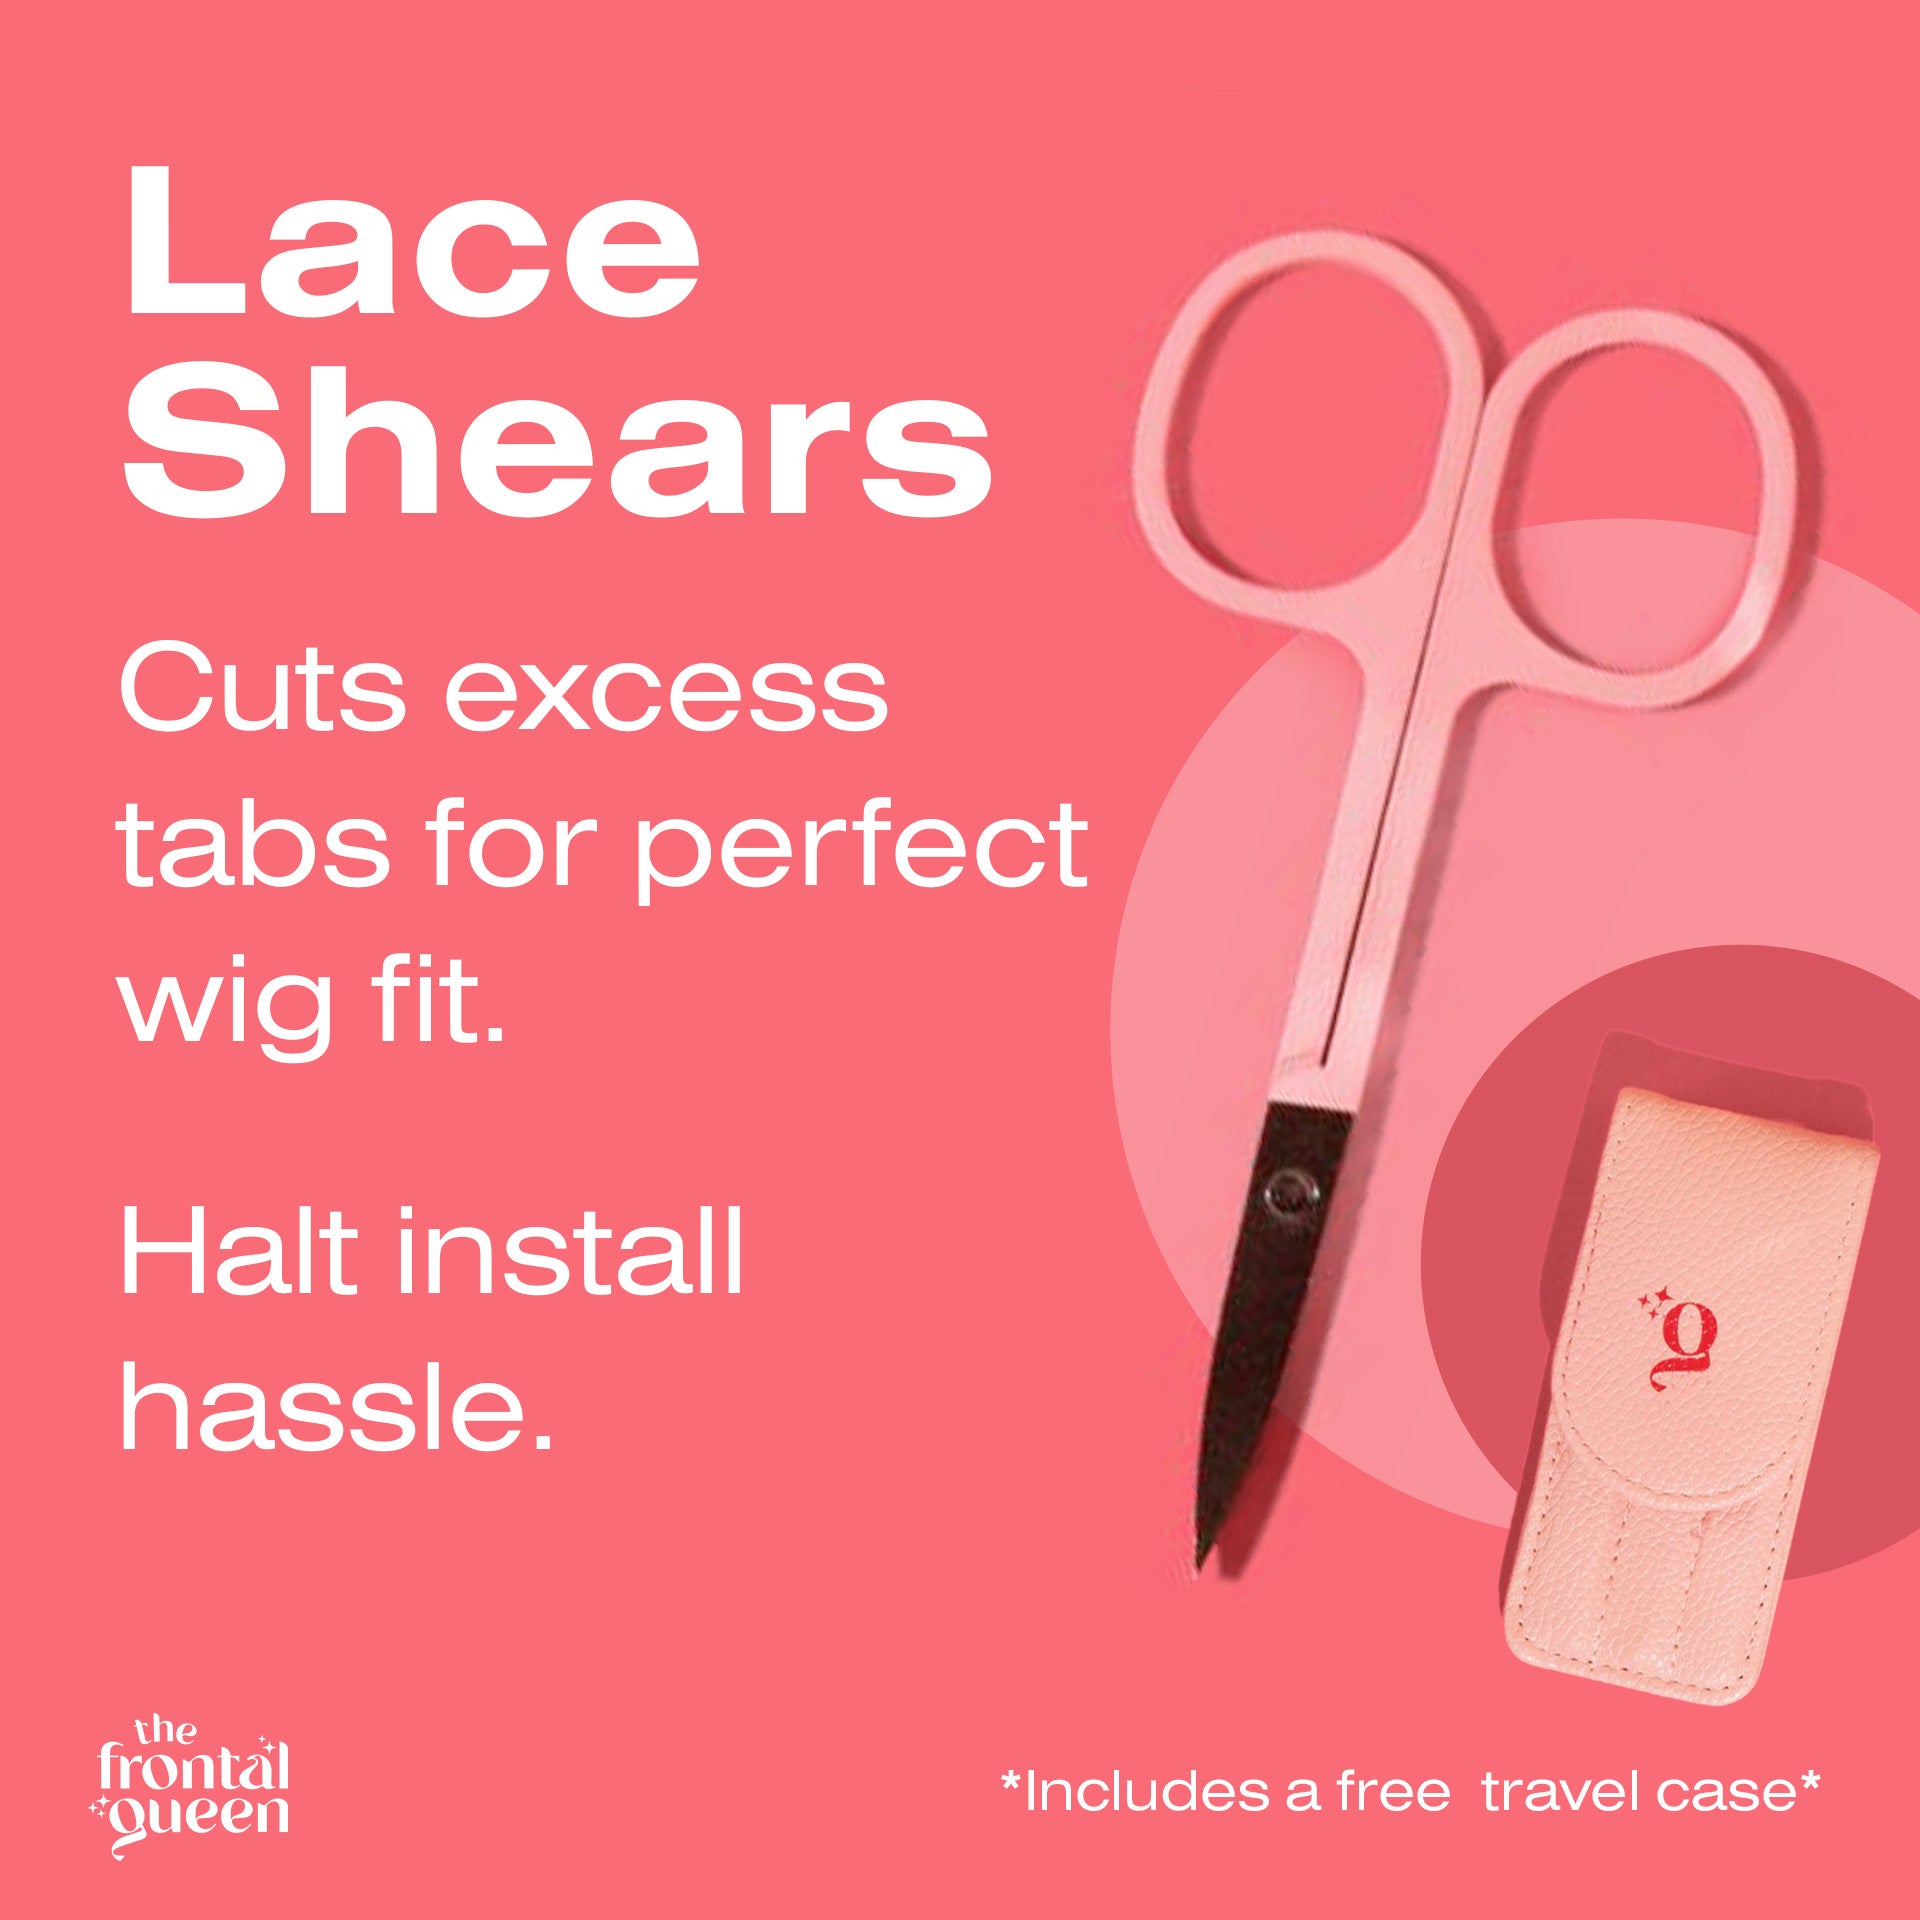 Replying to @Queen Lace Cutting with Zig-Zag shears! You can choose , Lace Wig